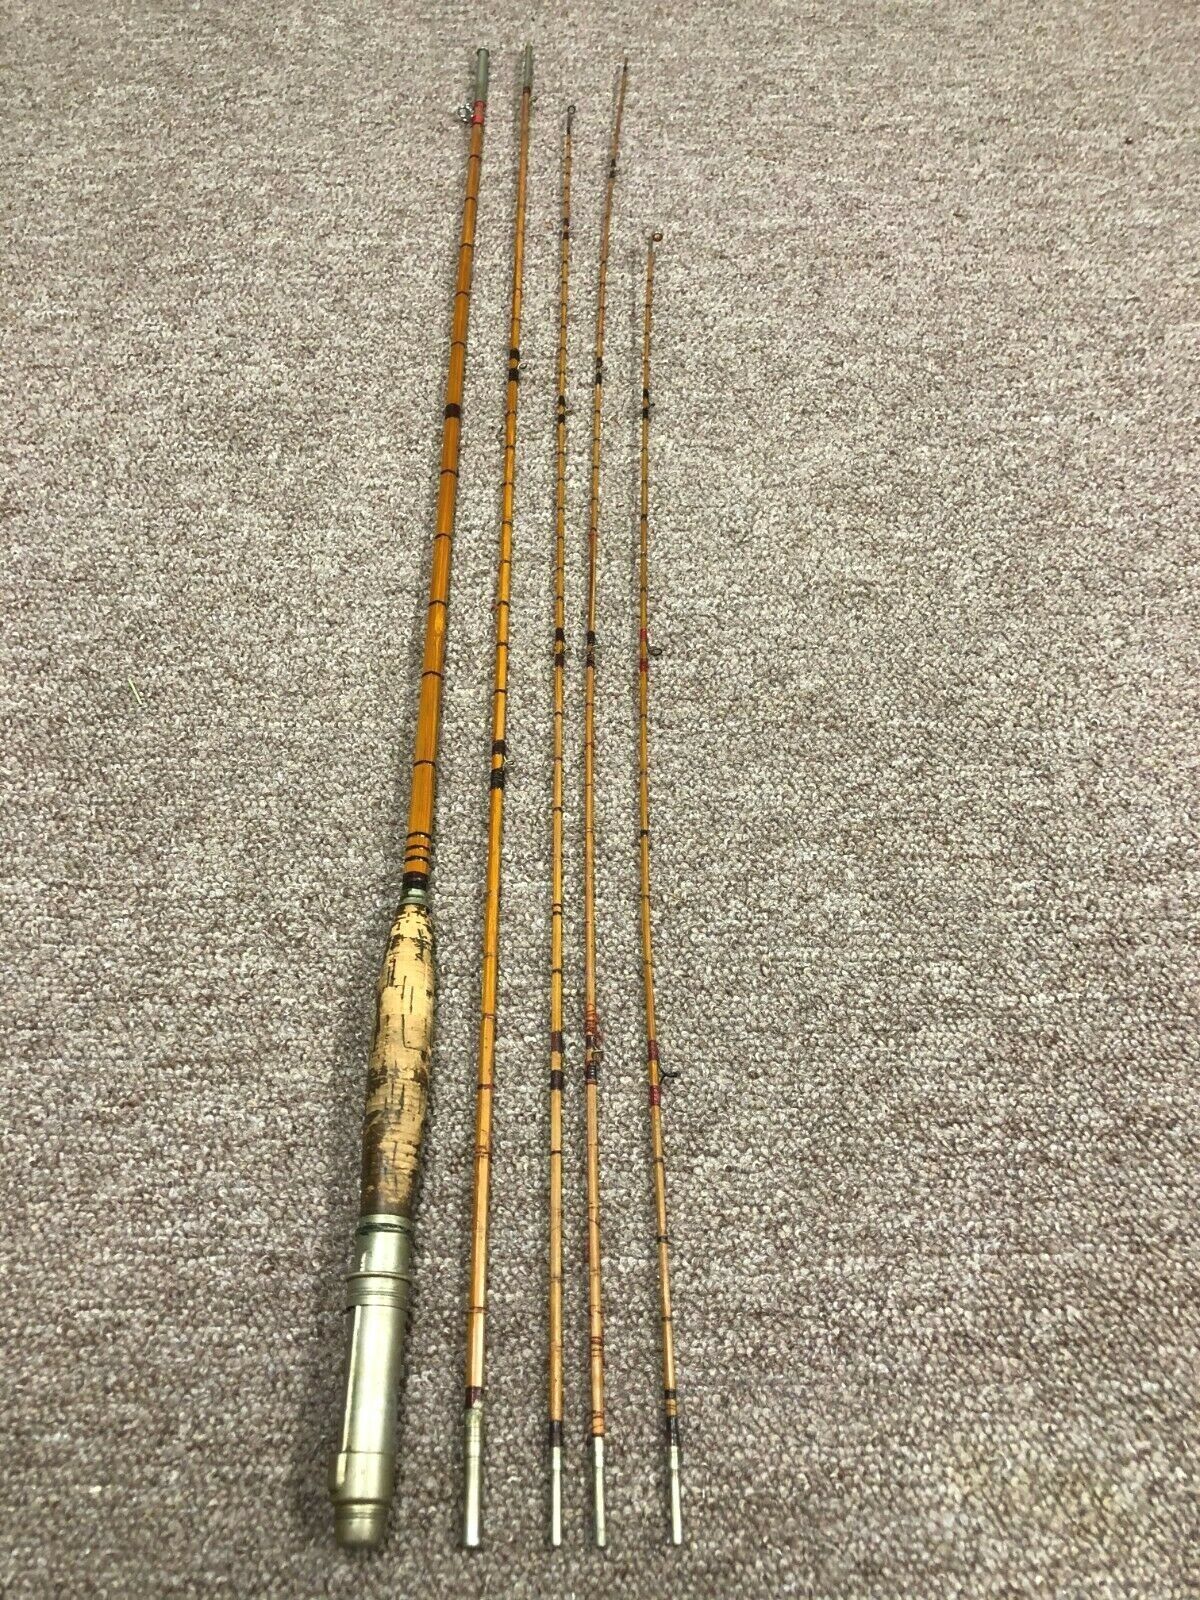 Antique 8-1/2 ft Bamboo fly rod early vintage fishing tackle primitive sporting